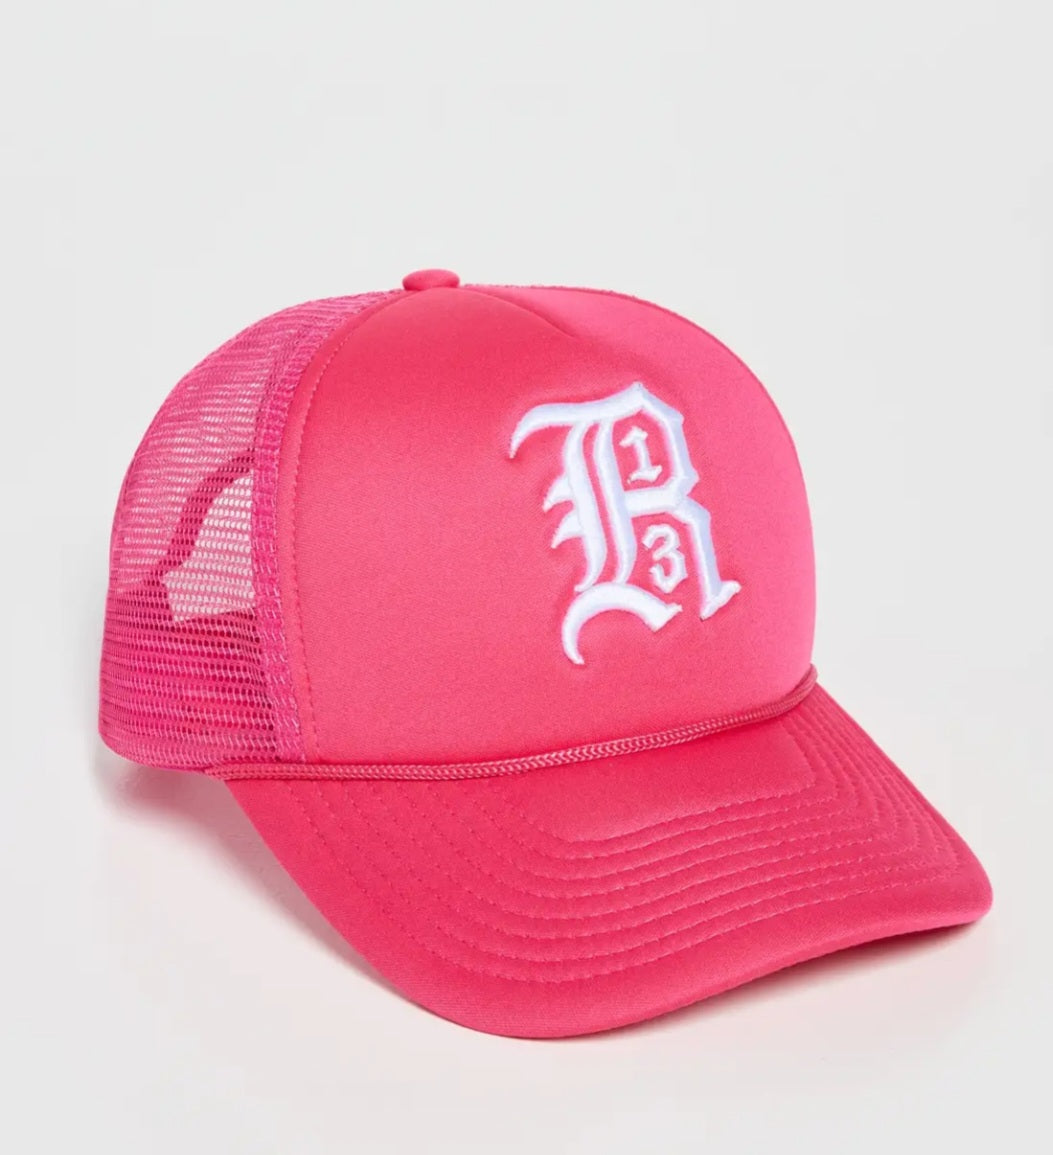 R13 Trucker Hat In Fuchsia Pink And White